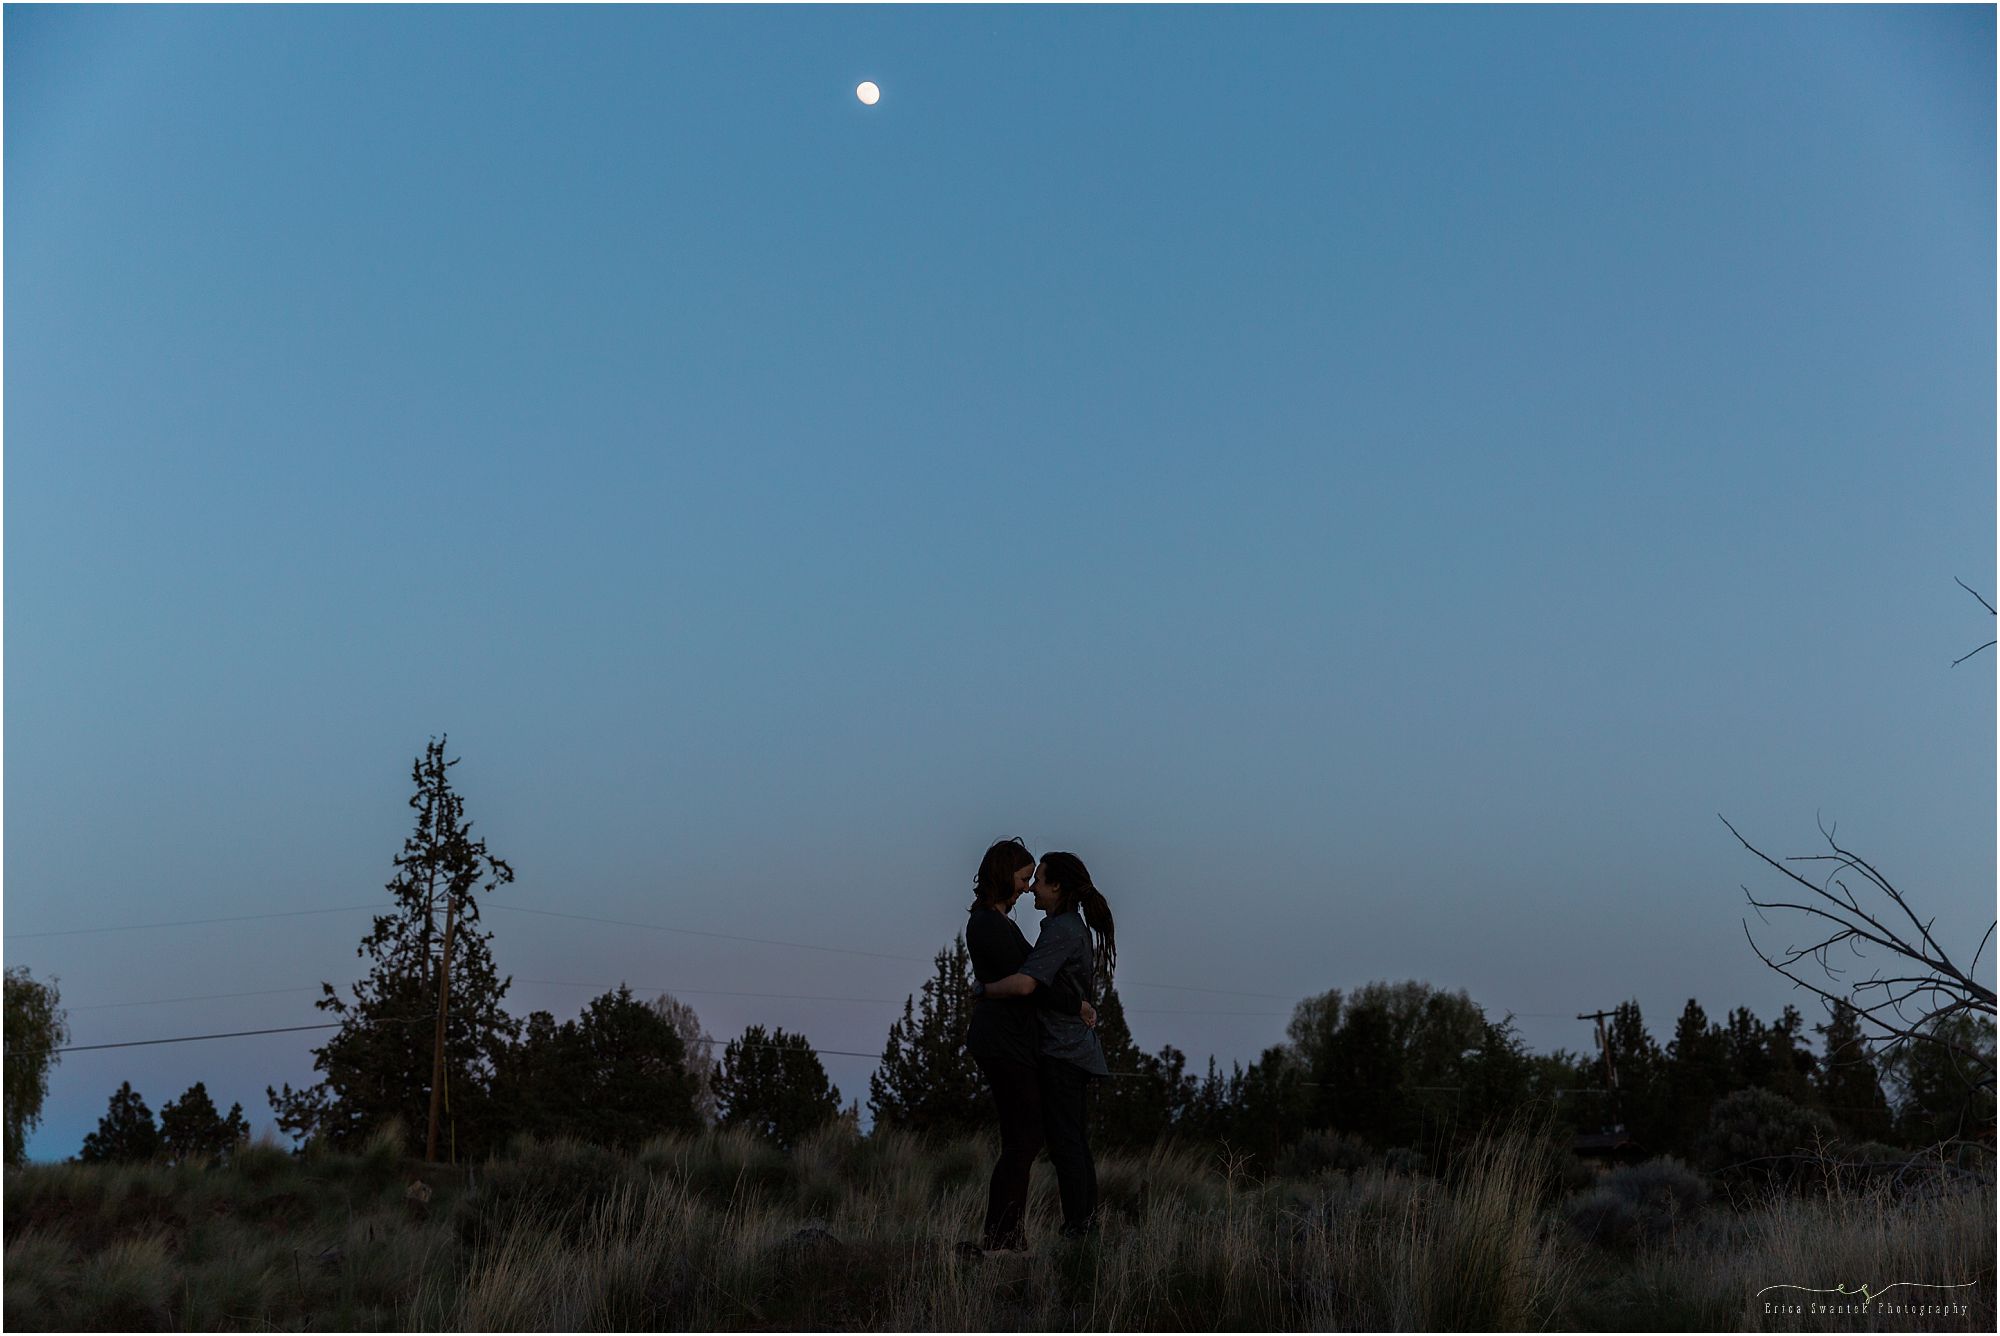 The sun had set and the beautiful blue hour was beginning with a crescent moon to create a perfect silhouette against the night sky at this Smith Rock Engagement Session. | Erica Swantek Photography